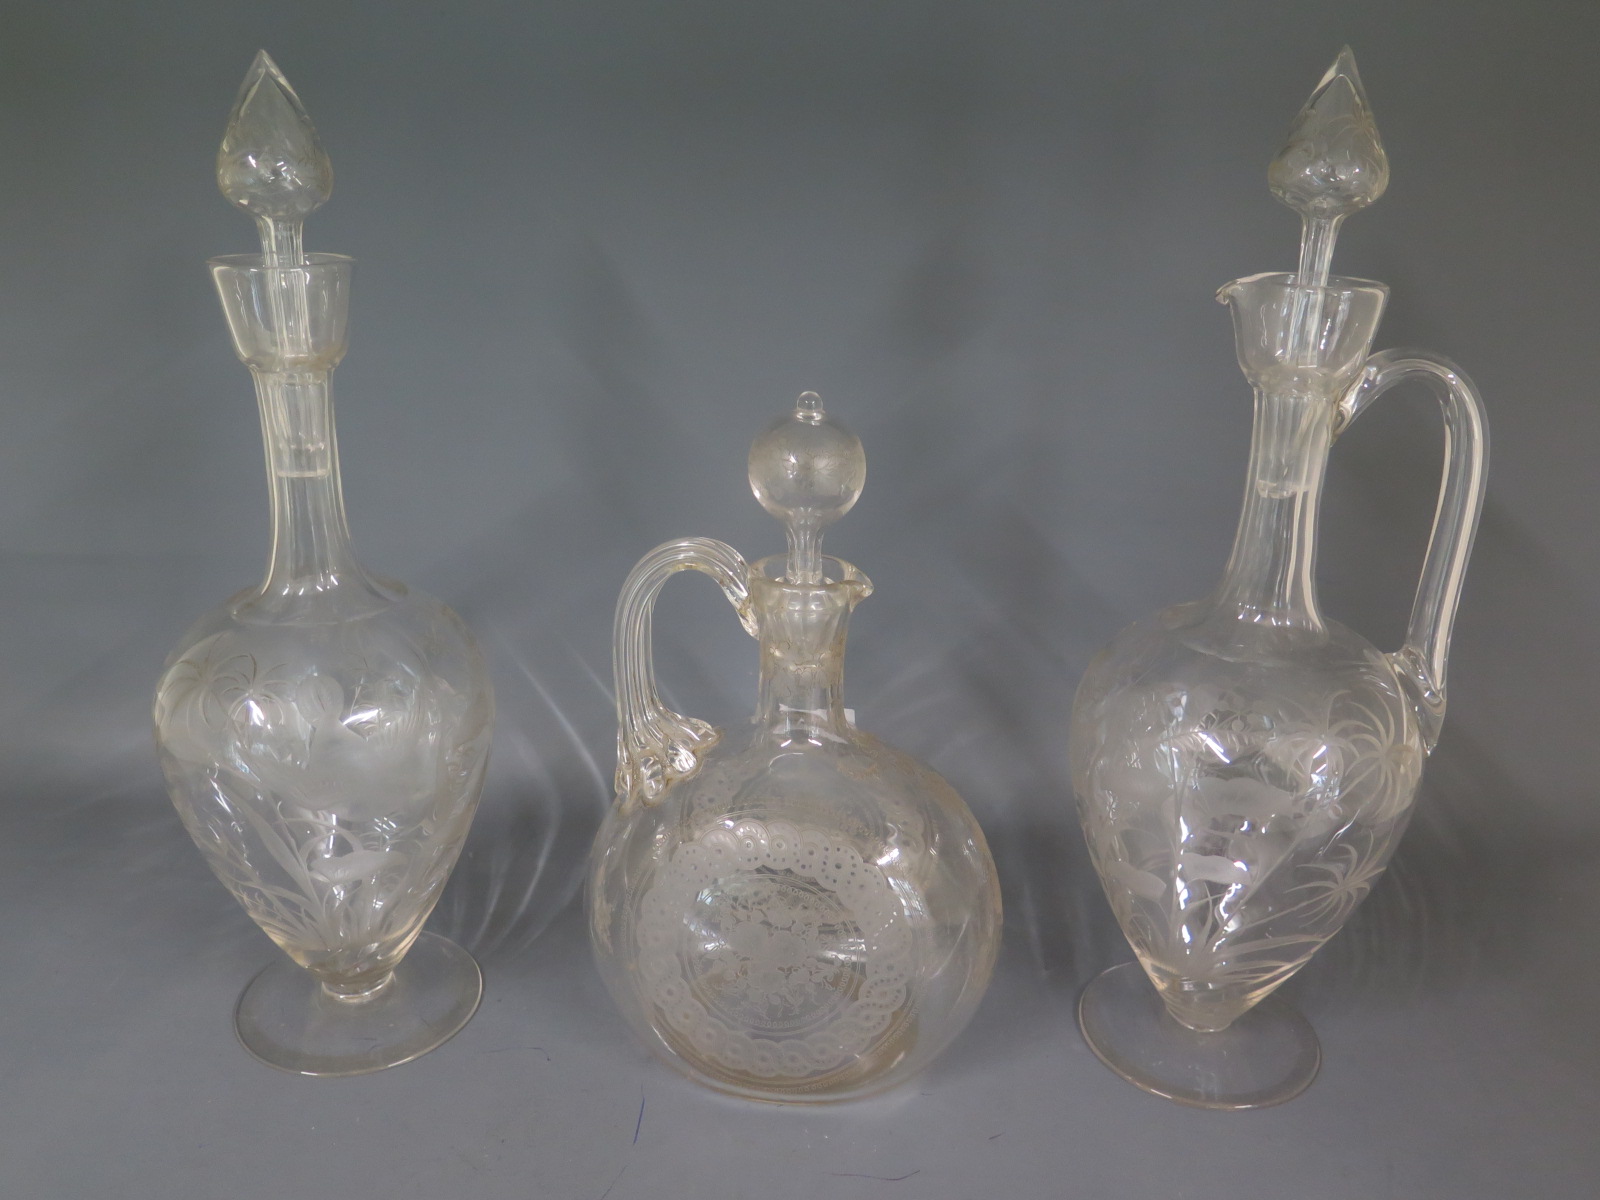 Three etched glass decanters - all good condition